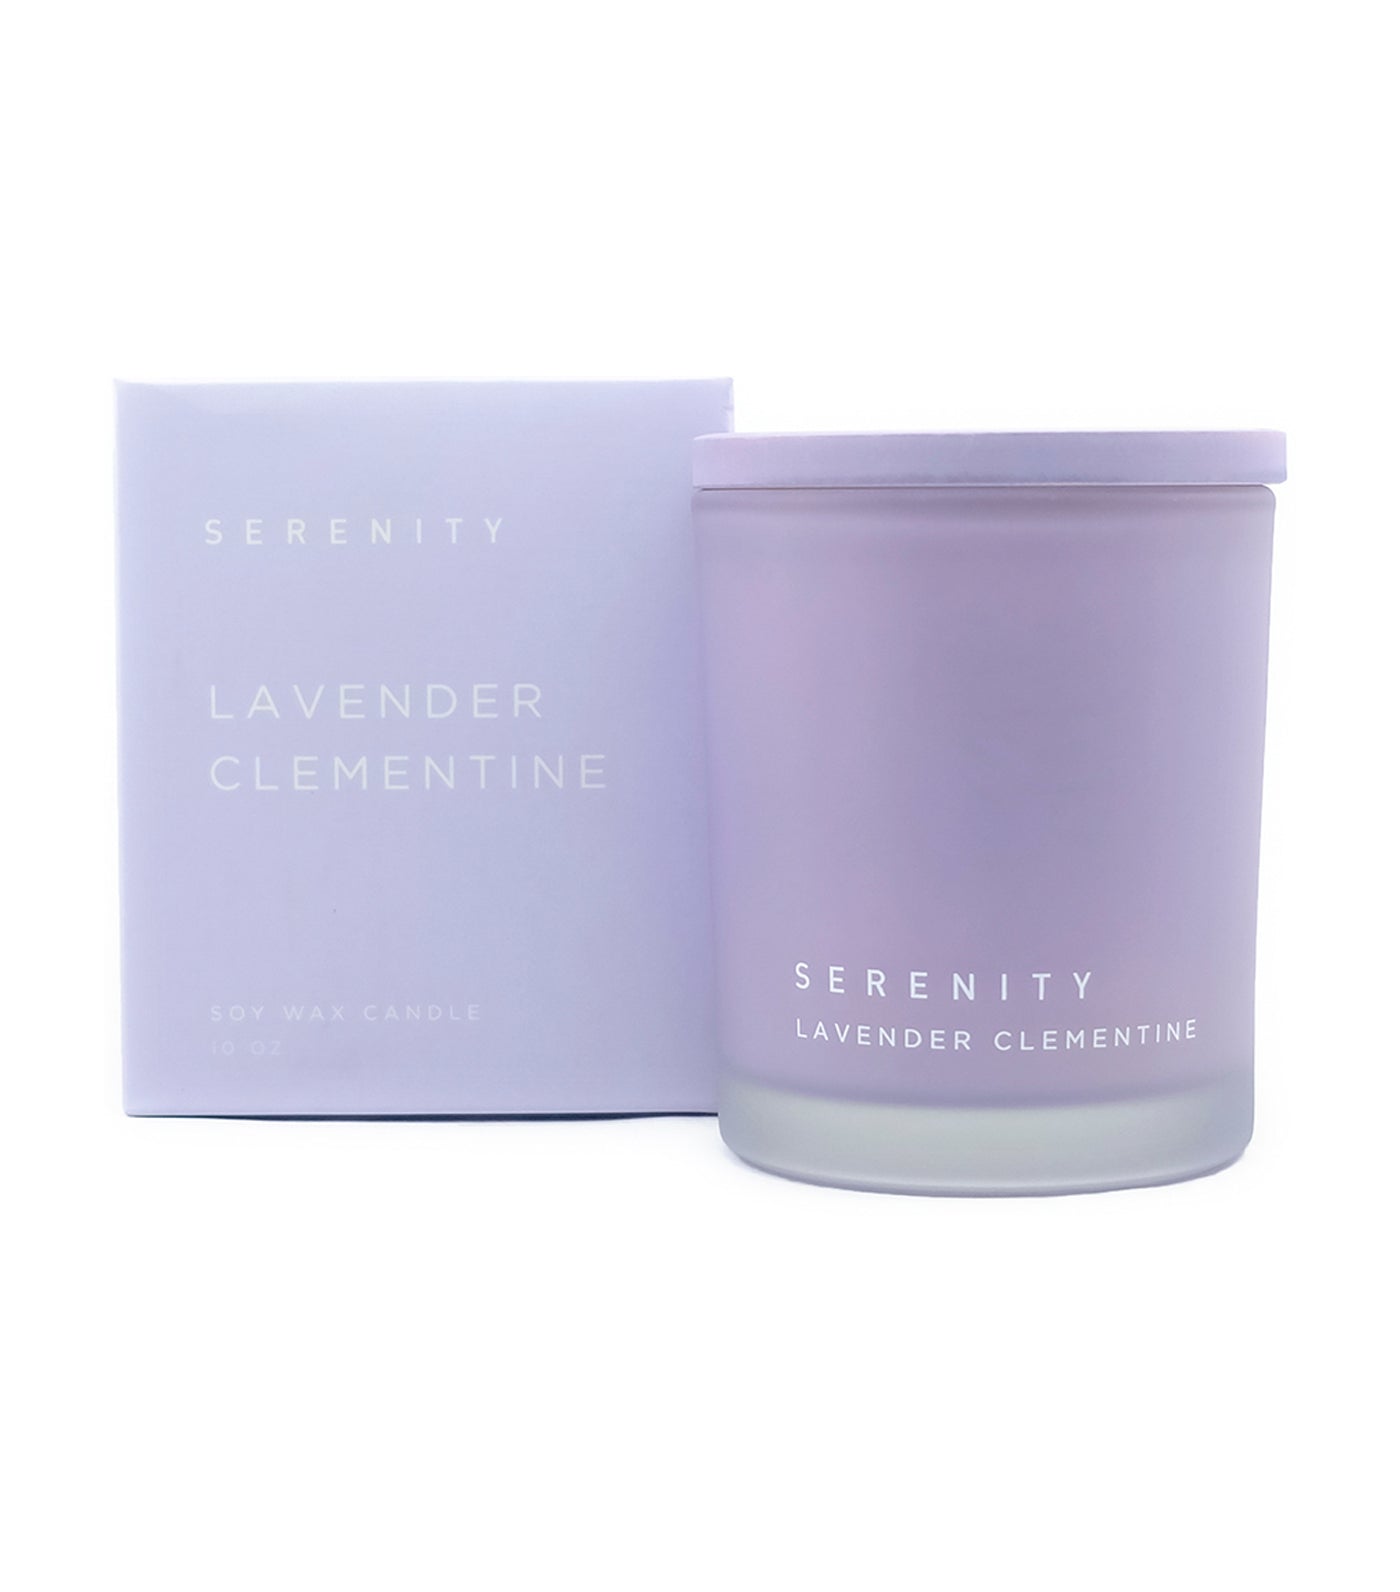 serenity lavender clementine soy wax candle